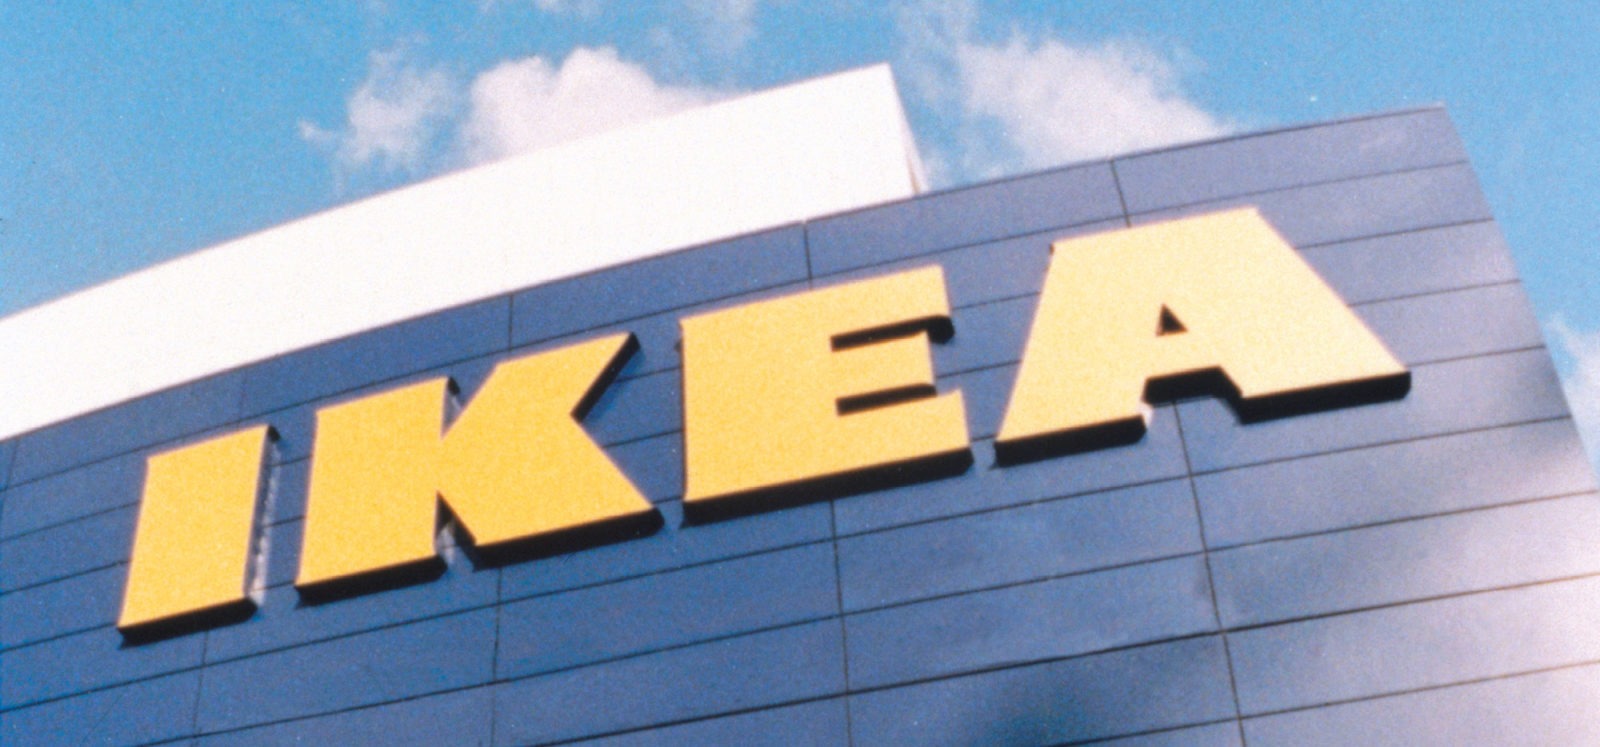 Blue ikea store facade against light blue sky. Giant yellow letters on the facade form the word IKEA.